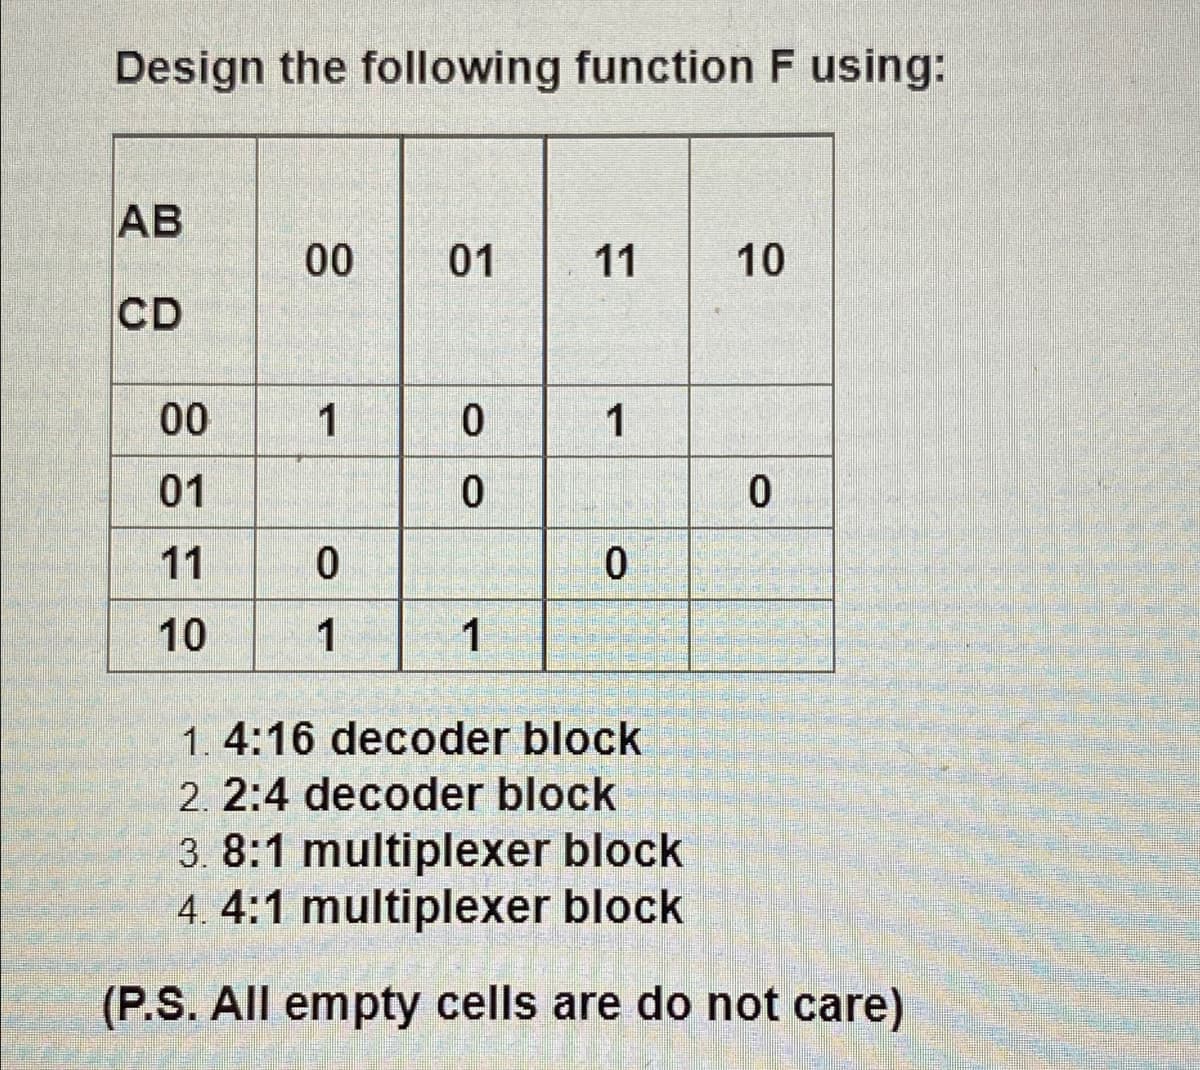 Design the following function F using:
AB
00
01
11
CD
00
1
1
01
11
10
1
1
1. 4:16 decoder block
2. 2:4 decoder block
3. 8:1 multiplexer block
4. 4:1 multiplexer block
(P.S. All empty cells are do not care)
10
